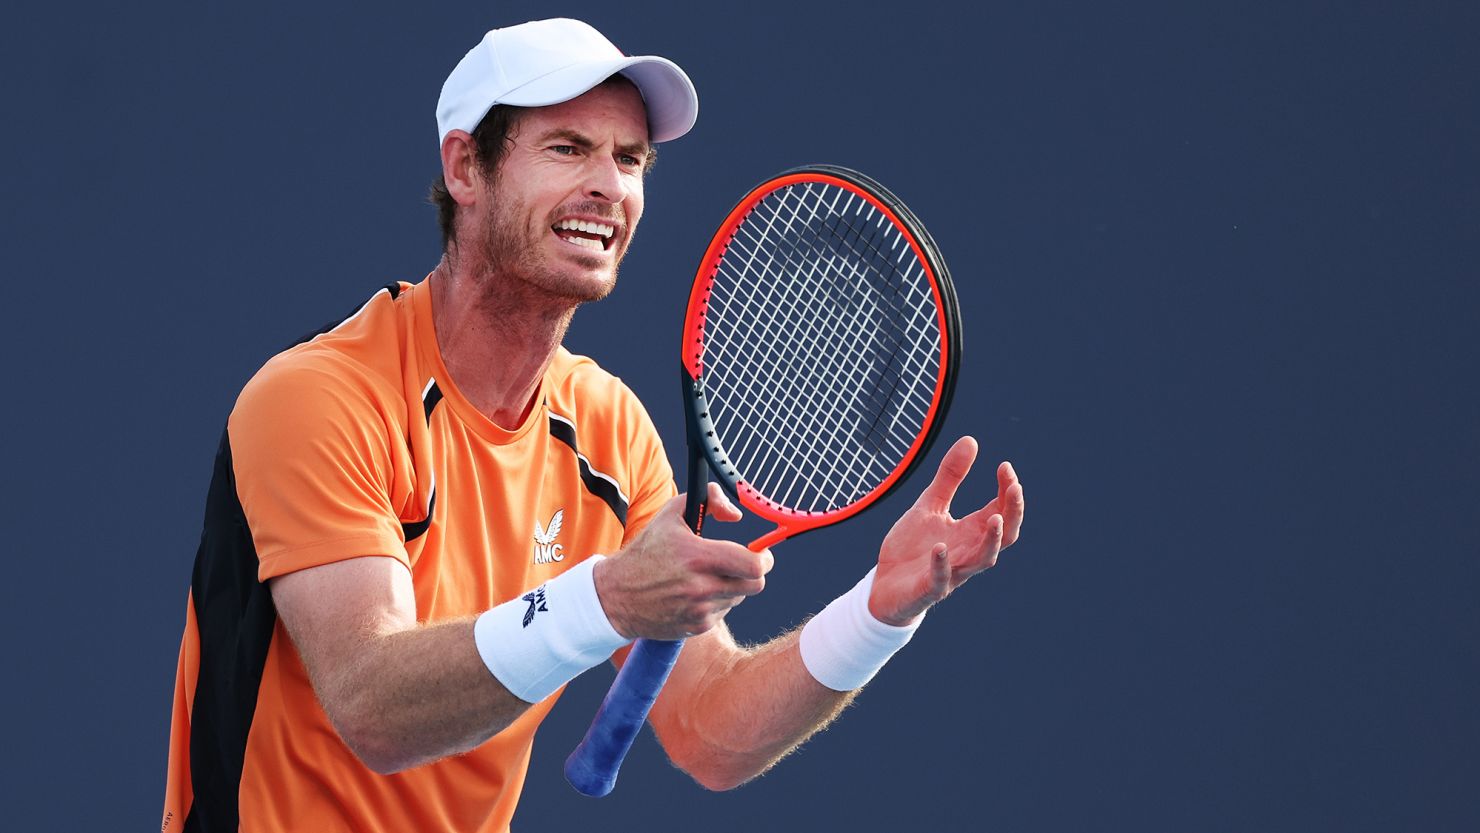 Andy Murray experienced another injury setback during his third-round defeat at the Miami Open.